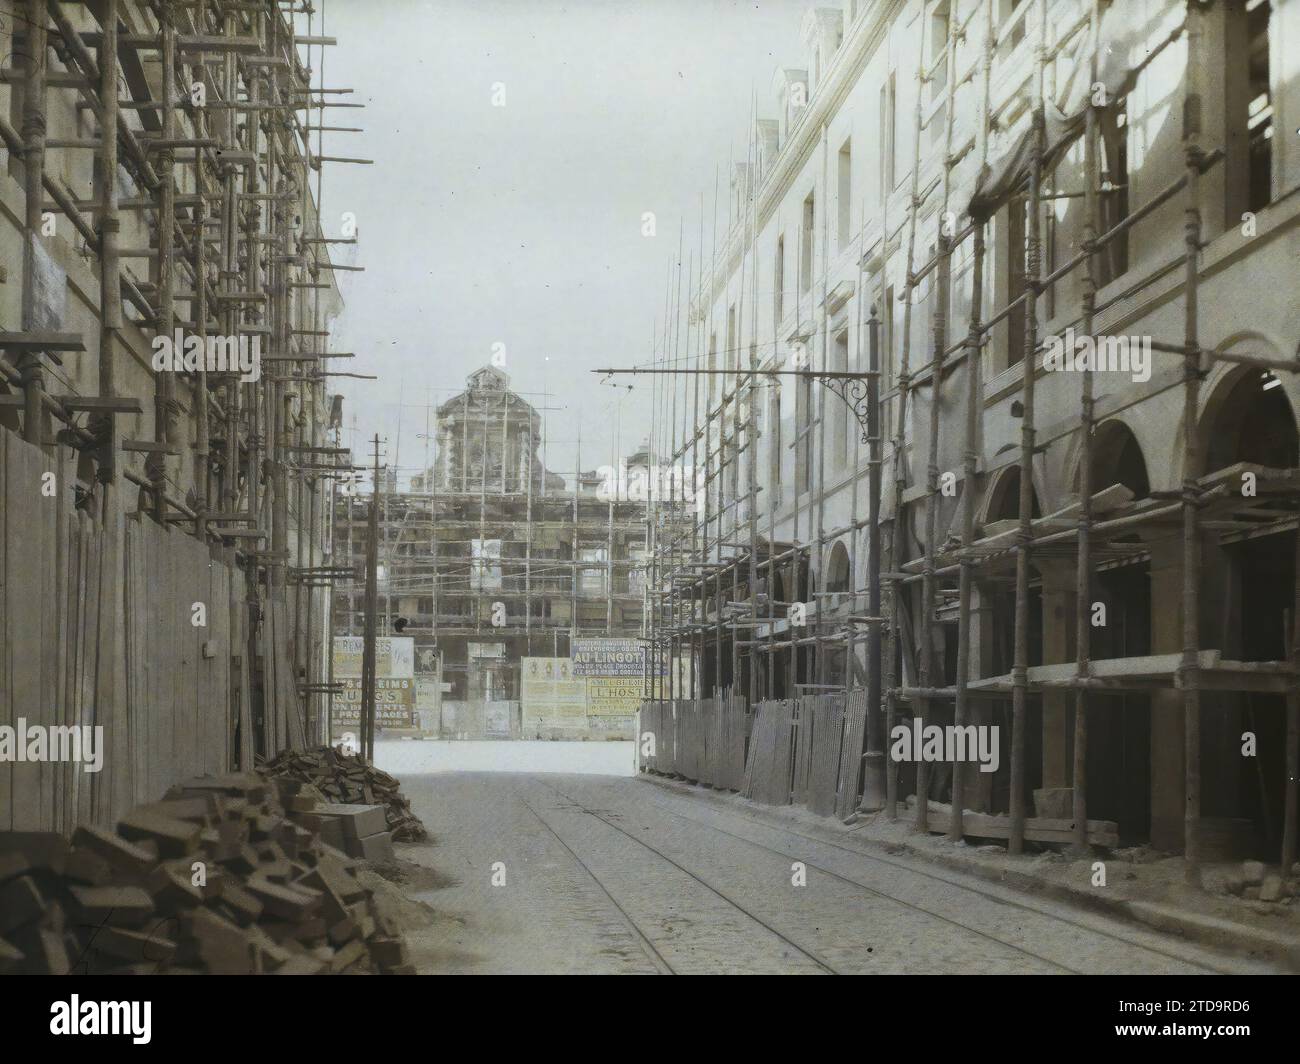 Reims, France, Housing, Architecture, First World War, Scaffolding, shoring, Works, Town Hall, town hall, Public civil architecture, Street, District, Reconstructions, Post-war, France, Reims, Rue Colbert and the Hôtel- de-City, Reims, 06/04/1924 - 06/04/1924, Léon, Auguste, photographer, 1924 (?) - Reims - Auguste Léon, Autochrome, photo, Glass, Autochrome, photo, Positive Stock Photo